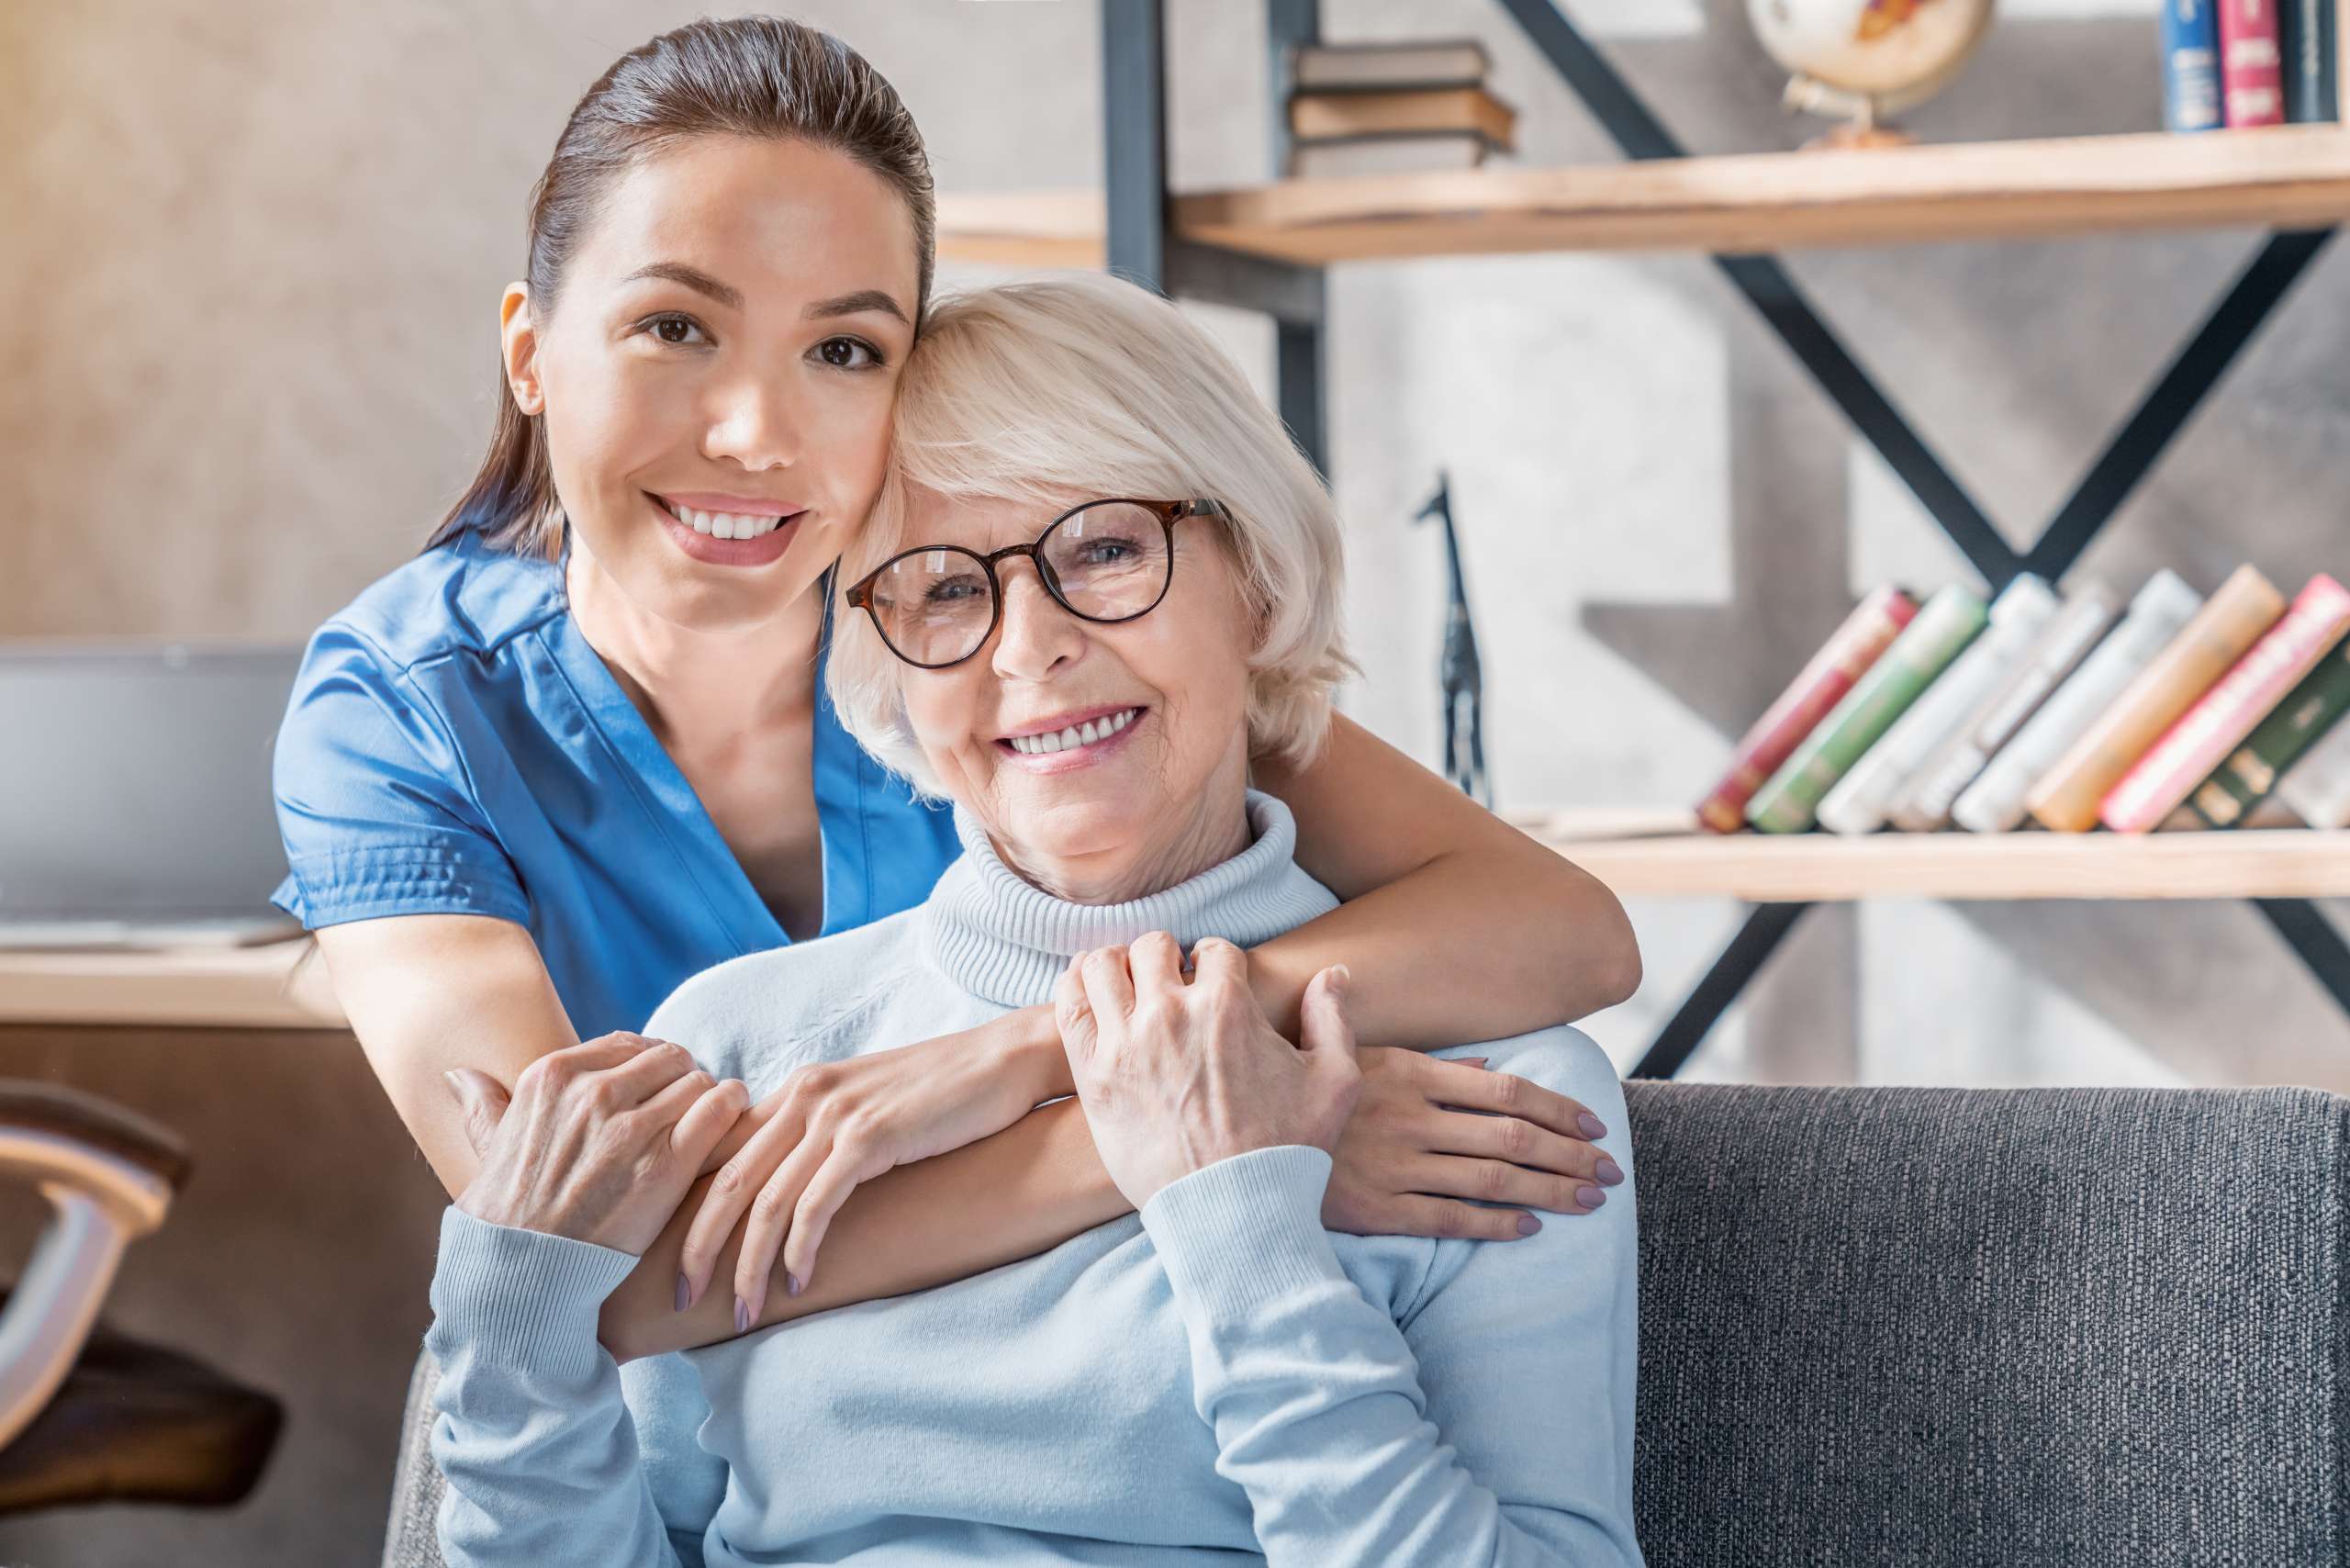 Safety risks for home healthcare workers